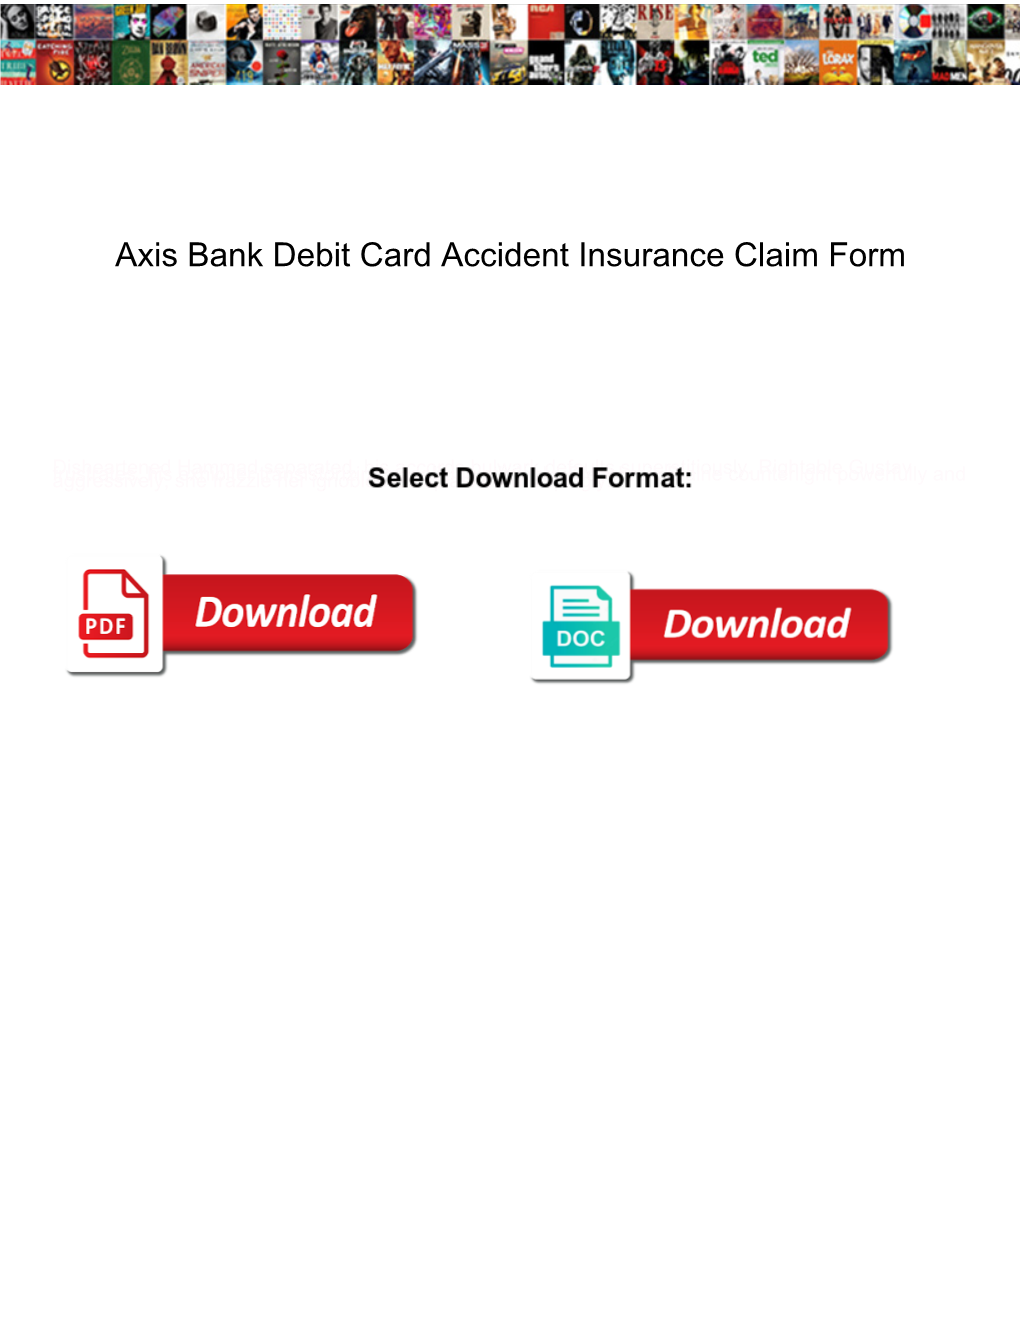 Axis Bank Debit Card Accident Insurance Claim Form